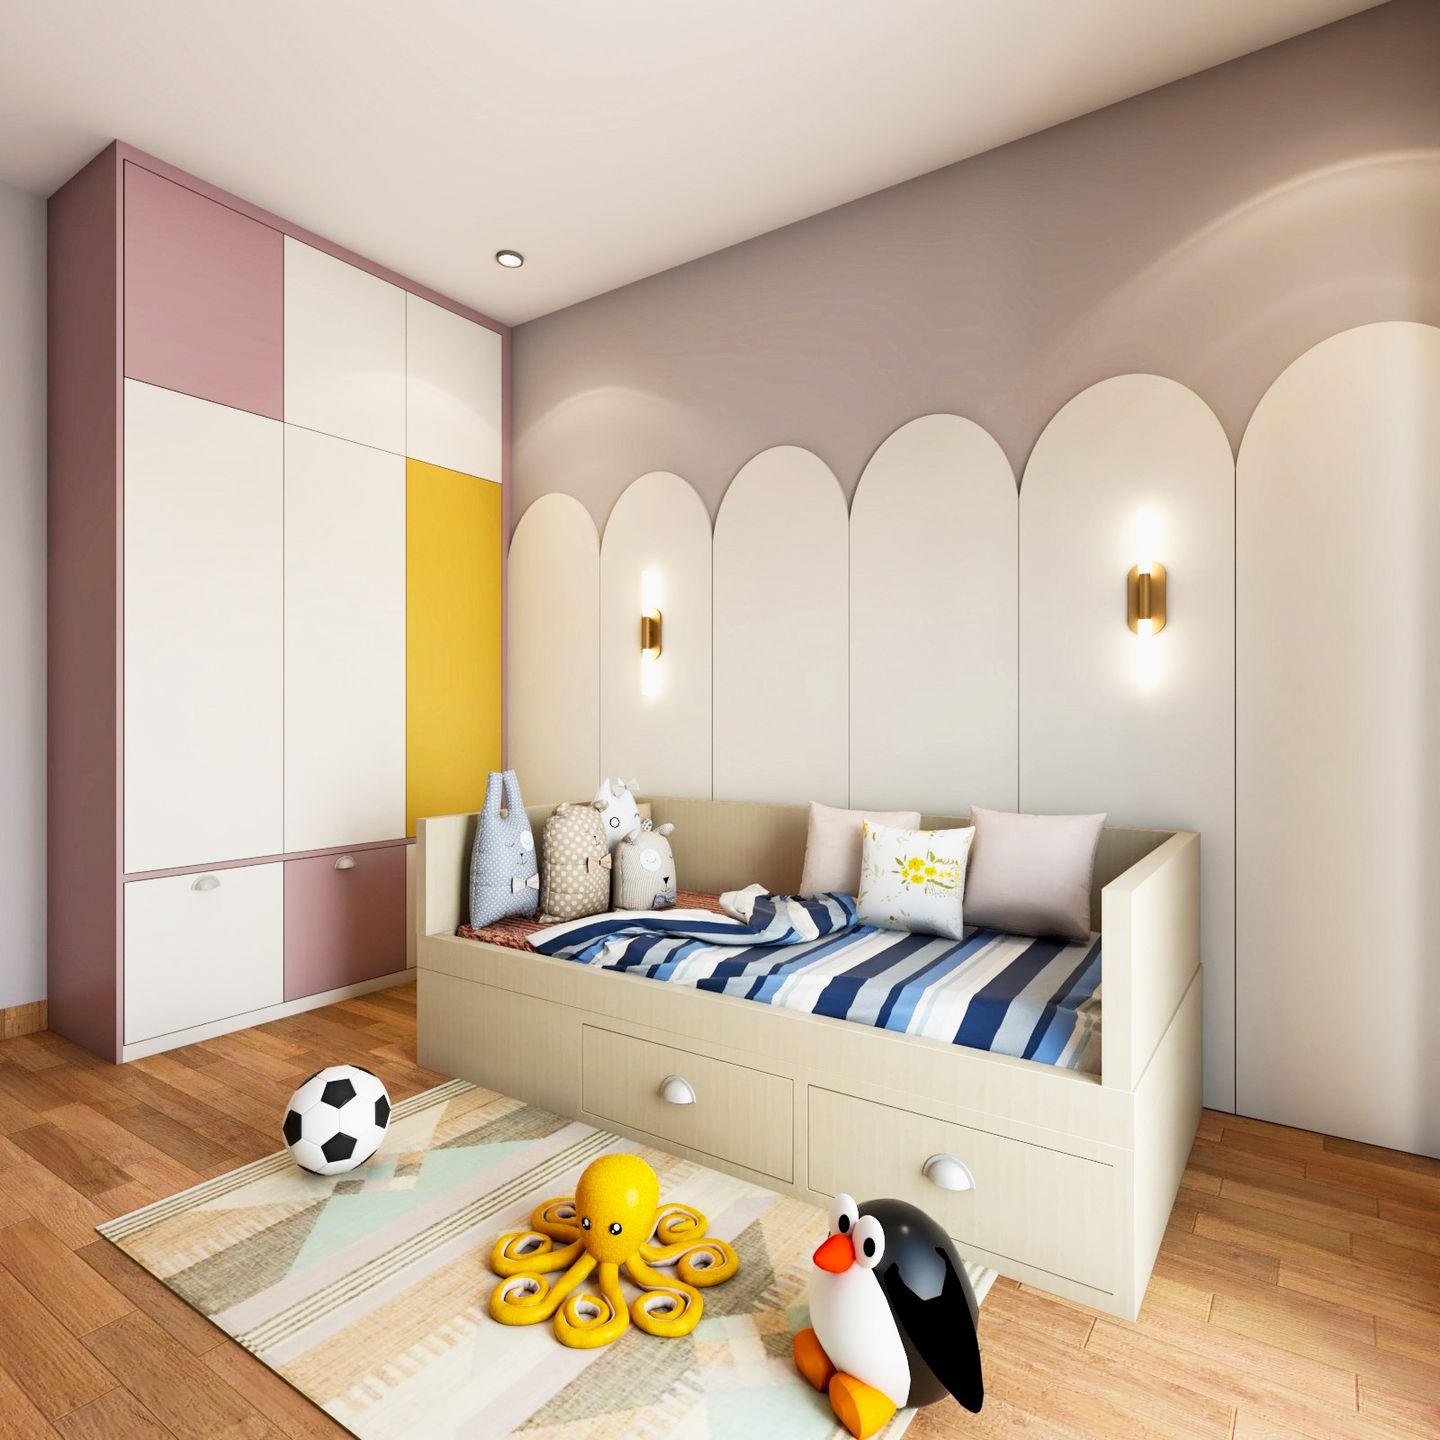 Kids Bedroom With A Single Bed With Drawers - Livspace